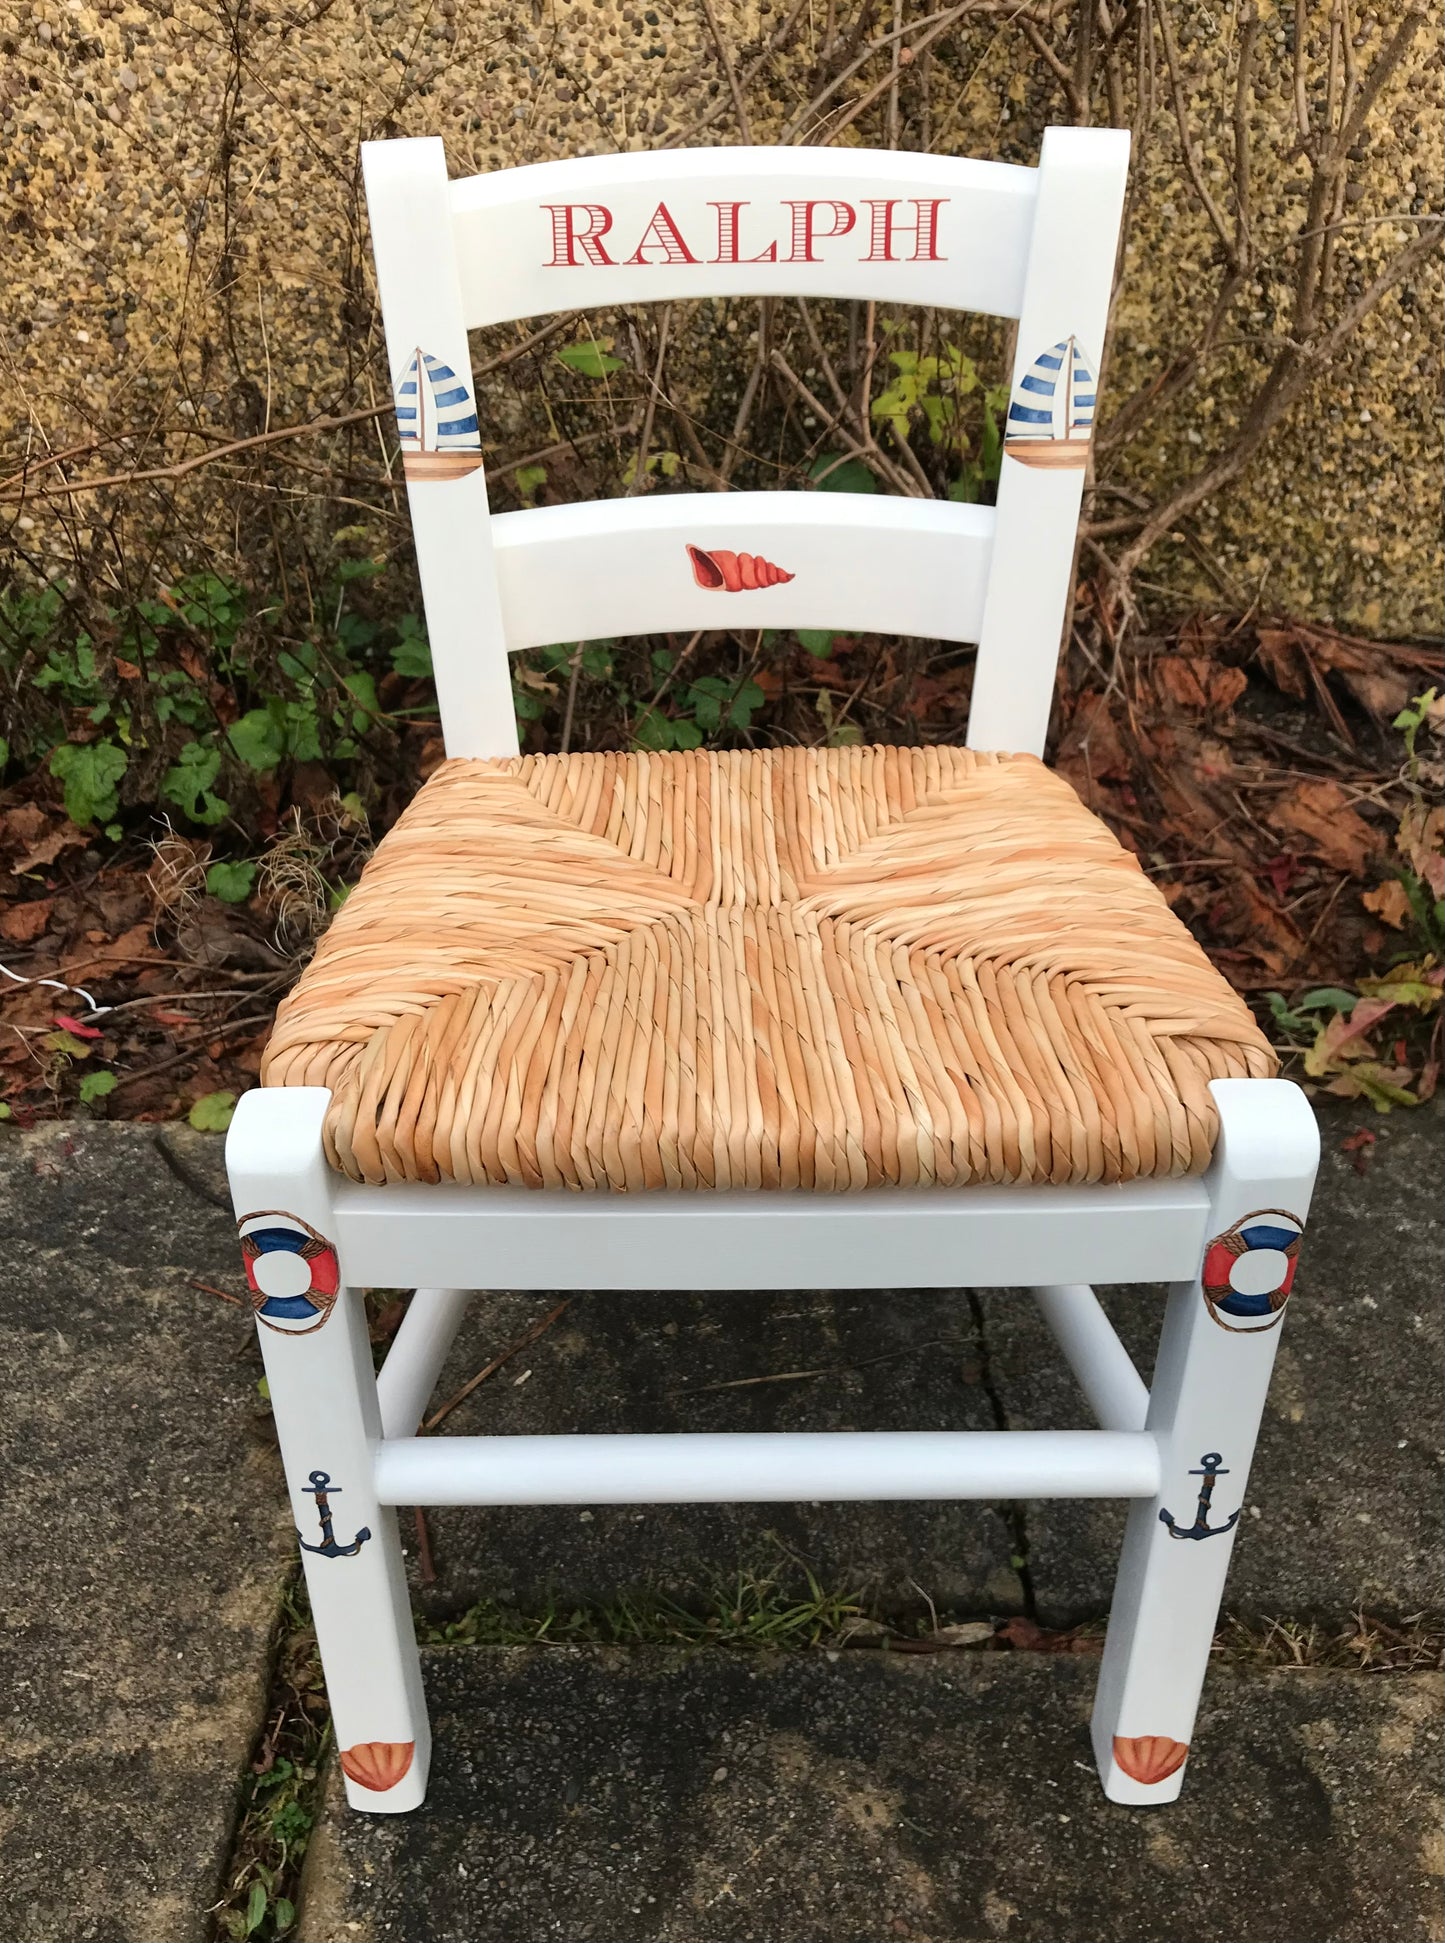 Rush seat personalised children's chair - Beach Life theme - made to order